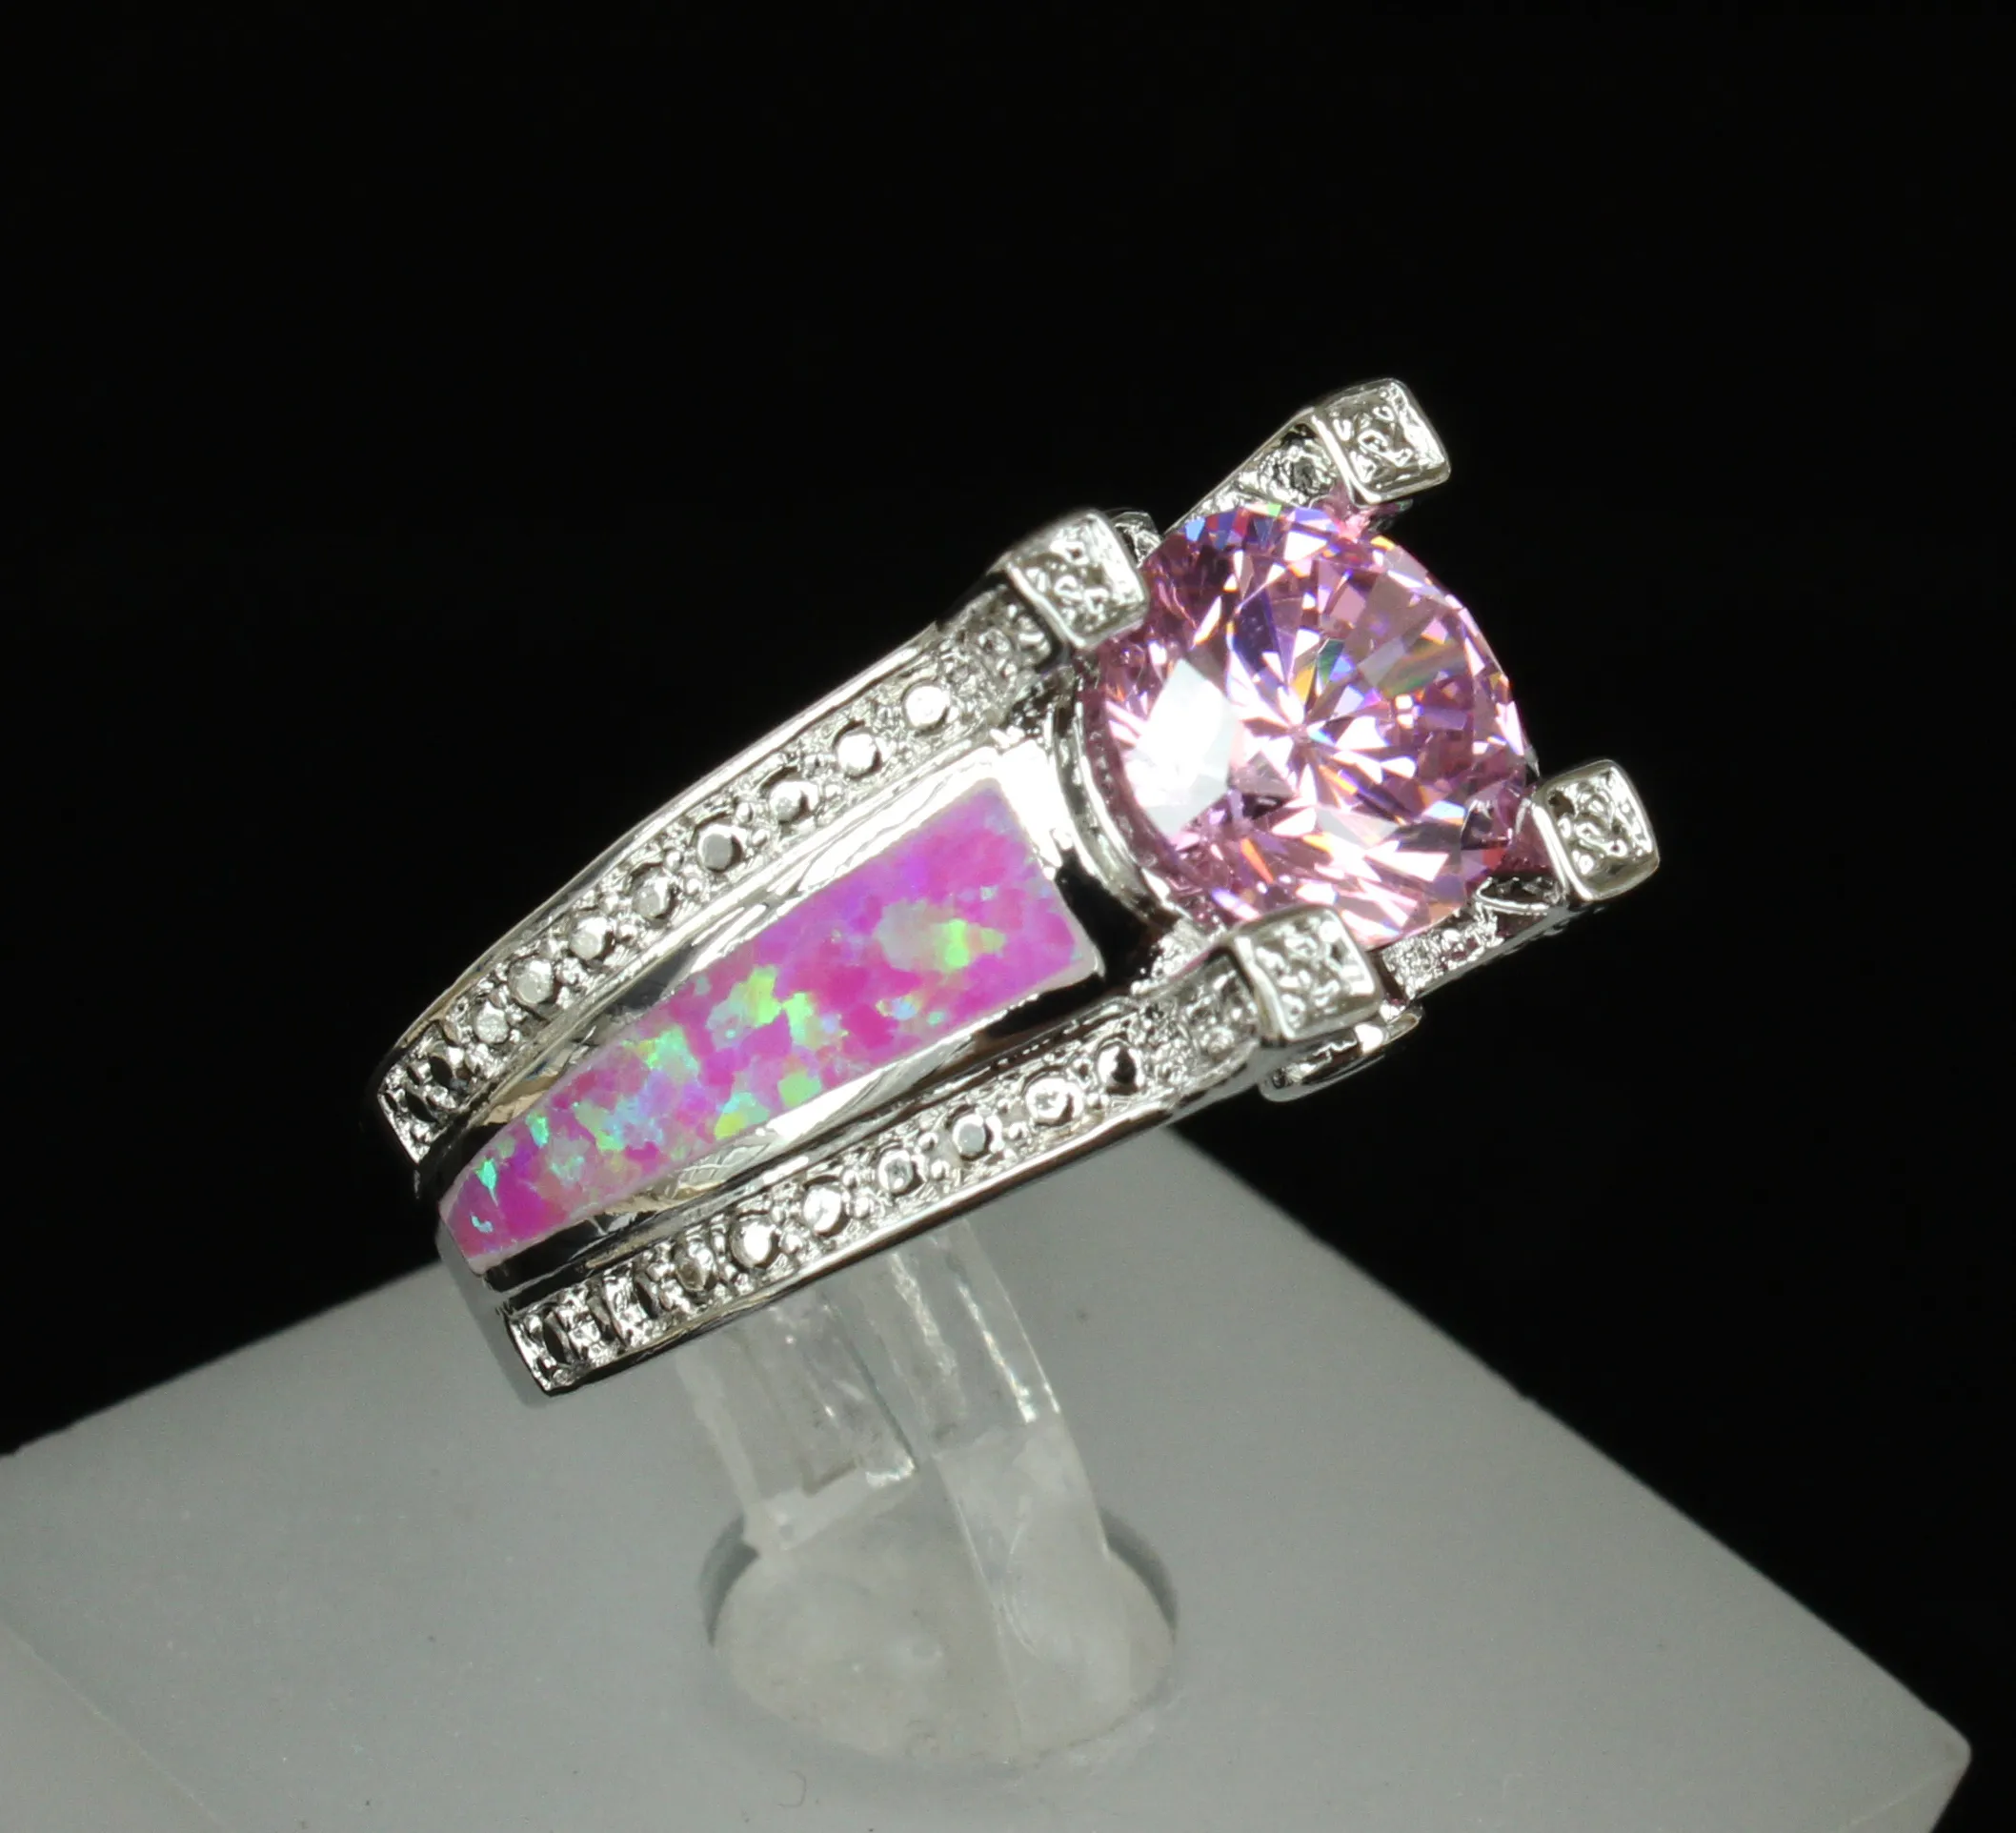 Amazing Pink Fire Opal Wedding Rings USA SIZE 7 8 9 From Fire_opal ...